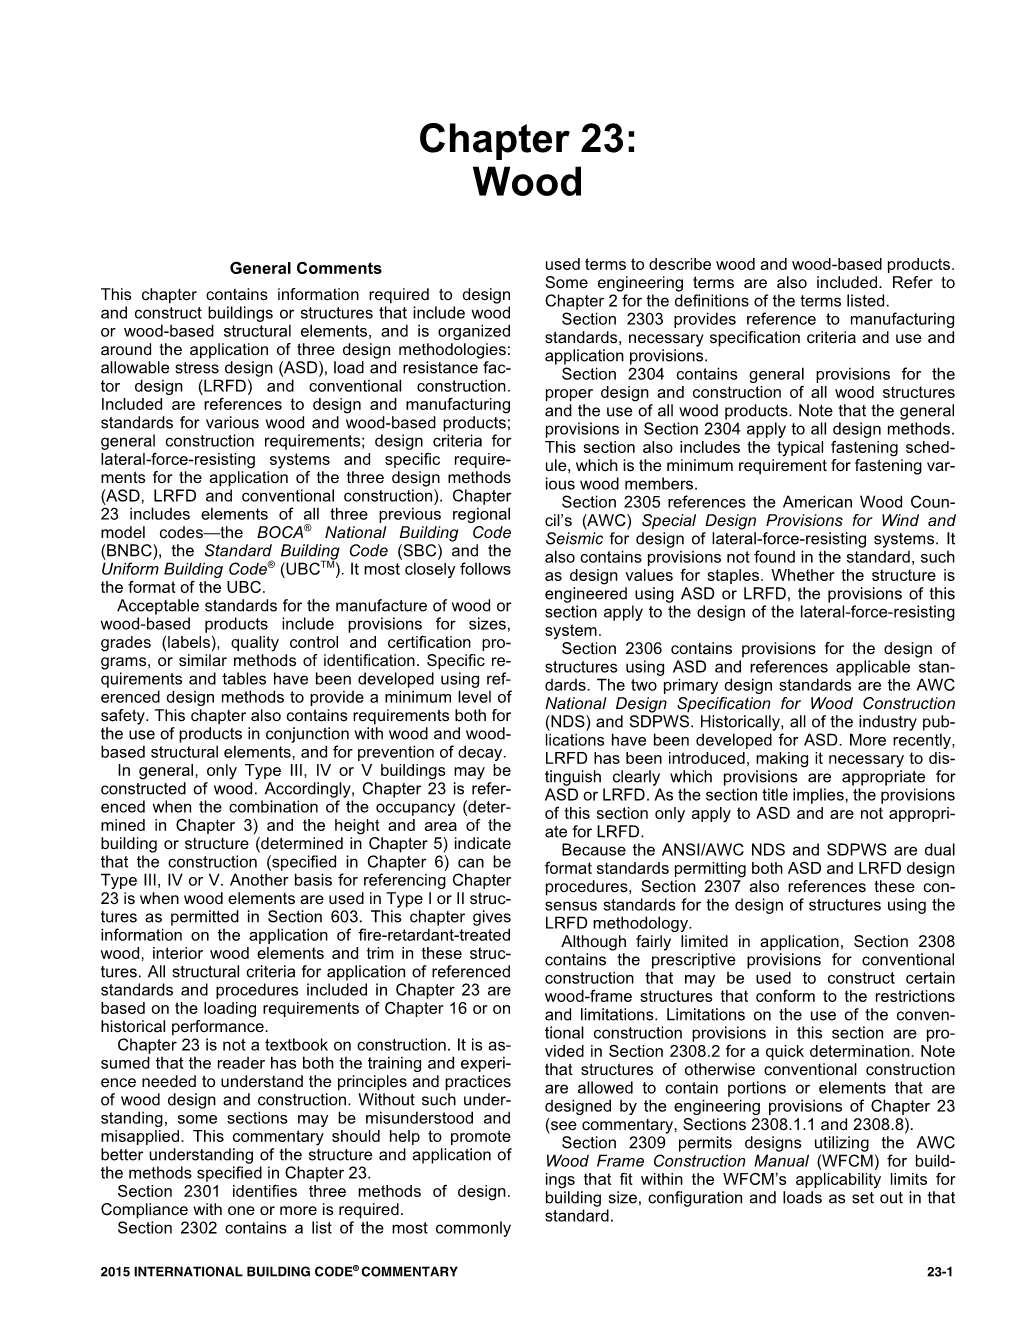 Chapter 23: Wood